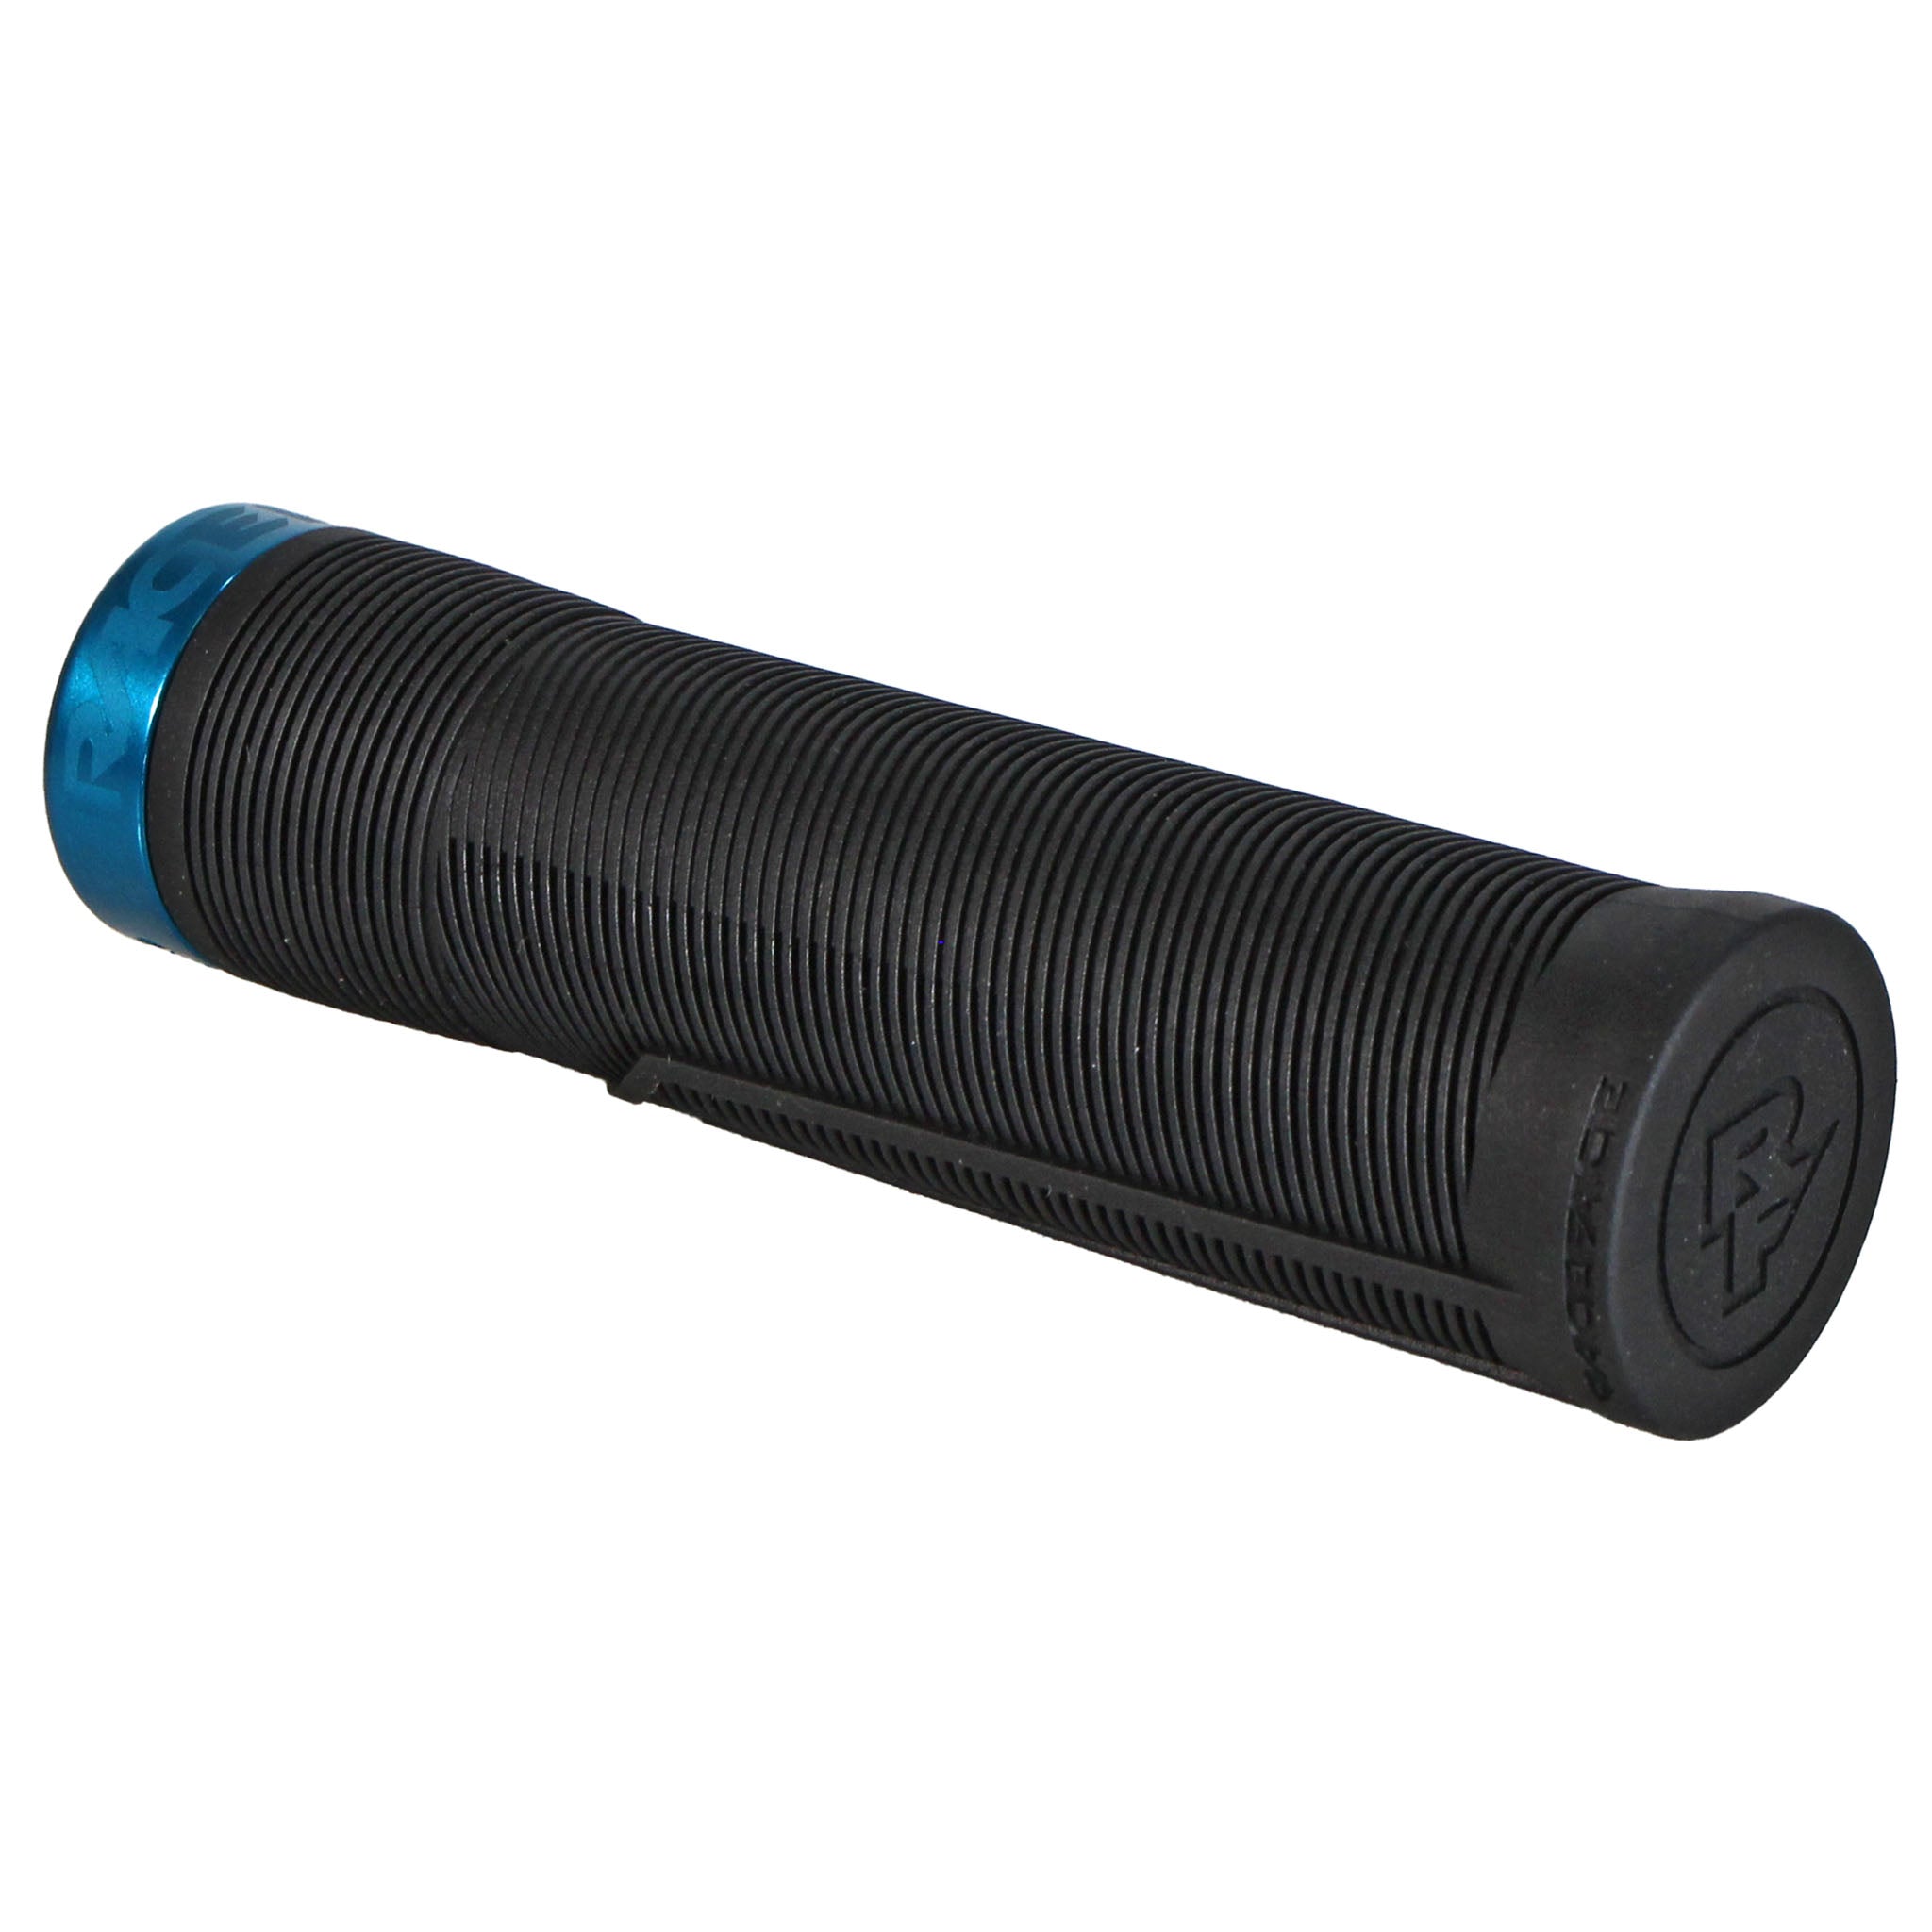 RaceFace Chester Grips - Lock-On Black/Turquoise 31mm